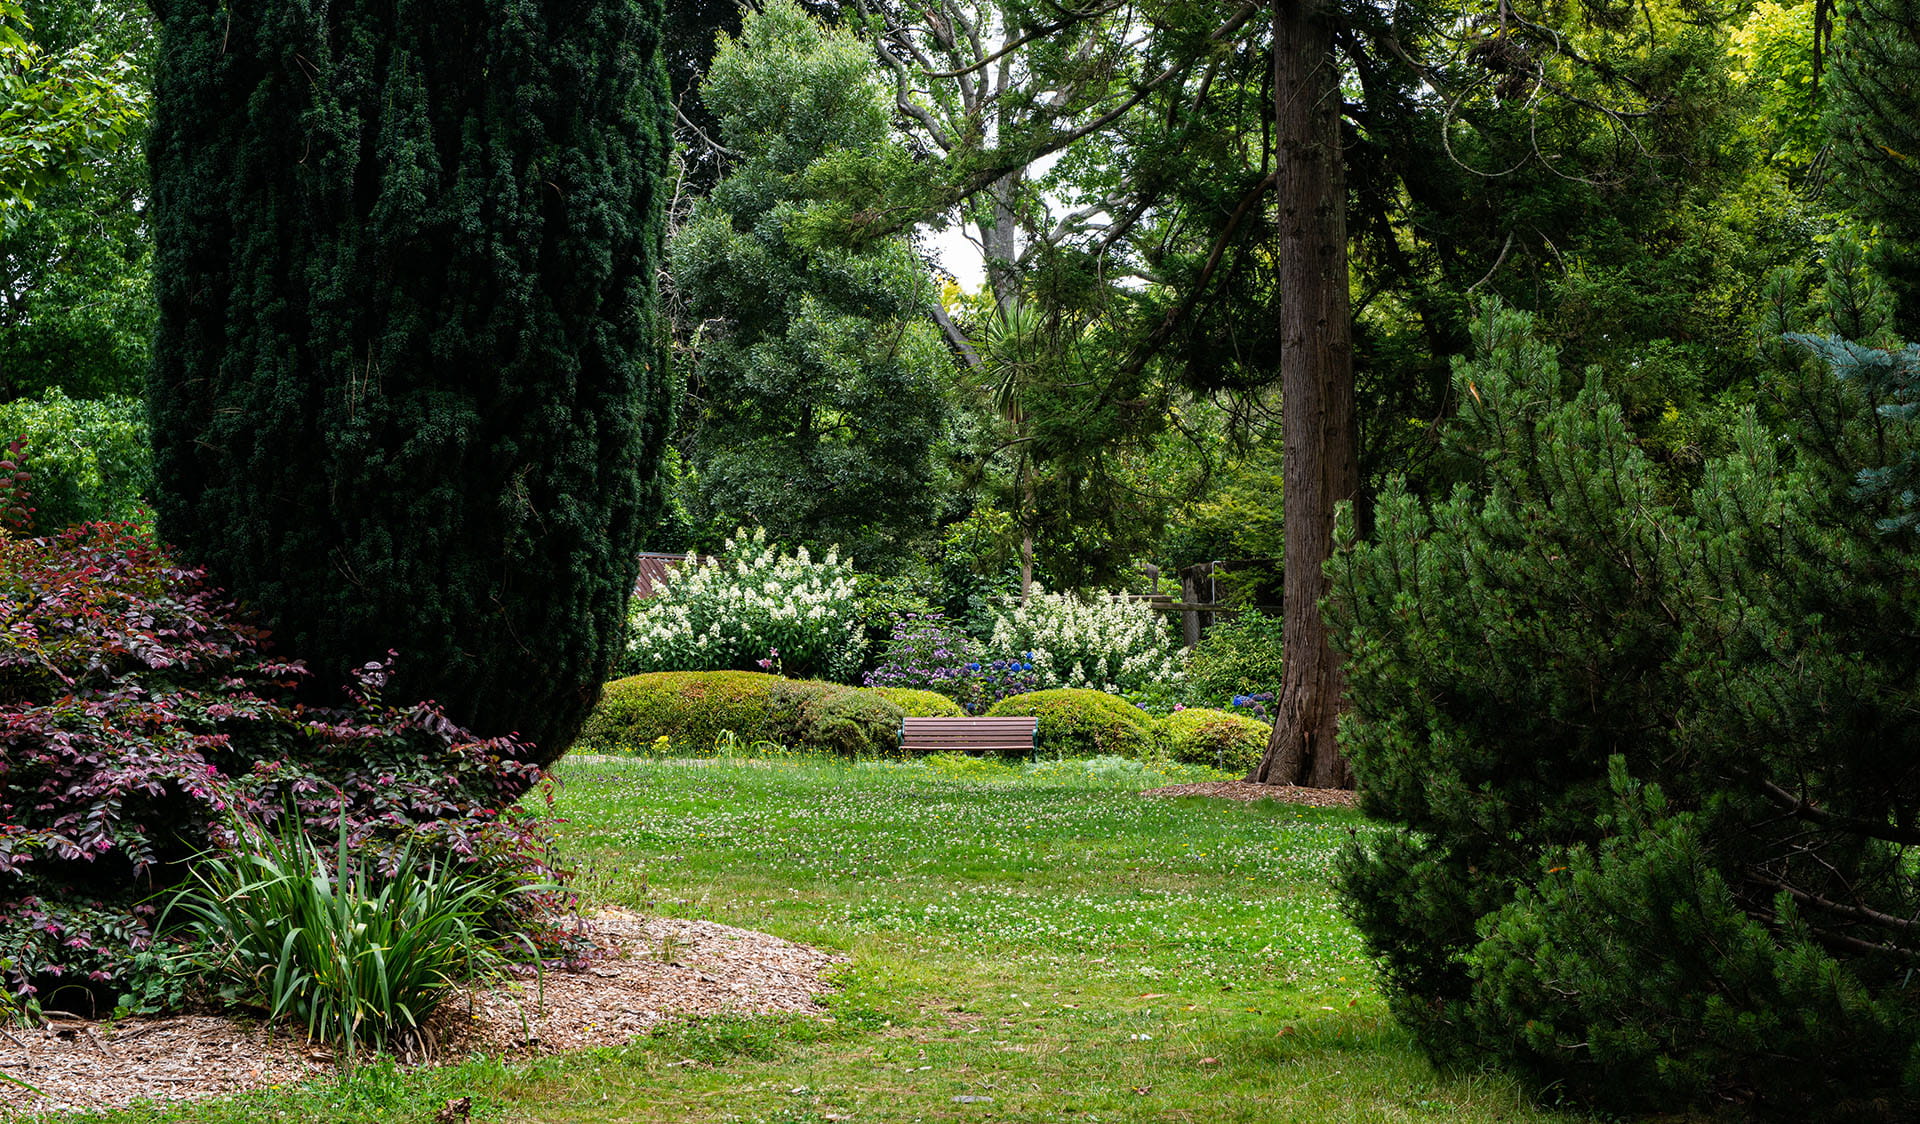 Park bench on a lawn surrounded by trees and shrubs